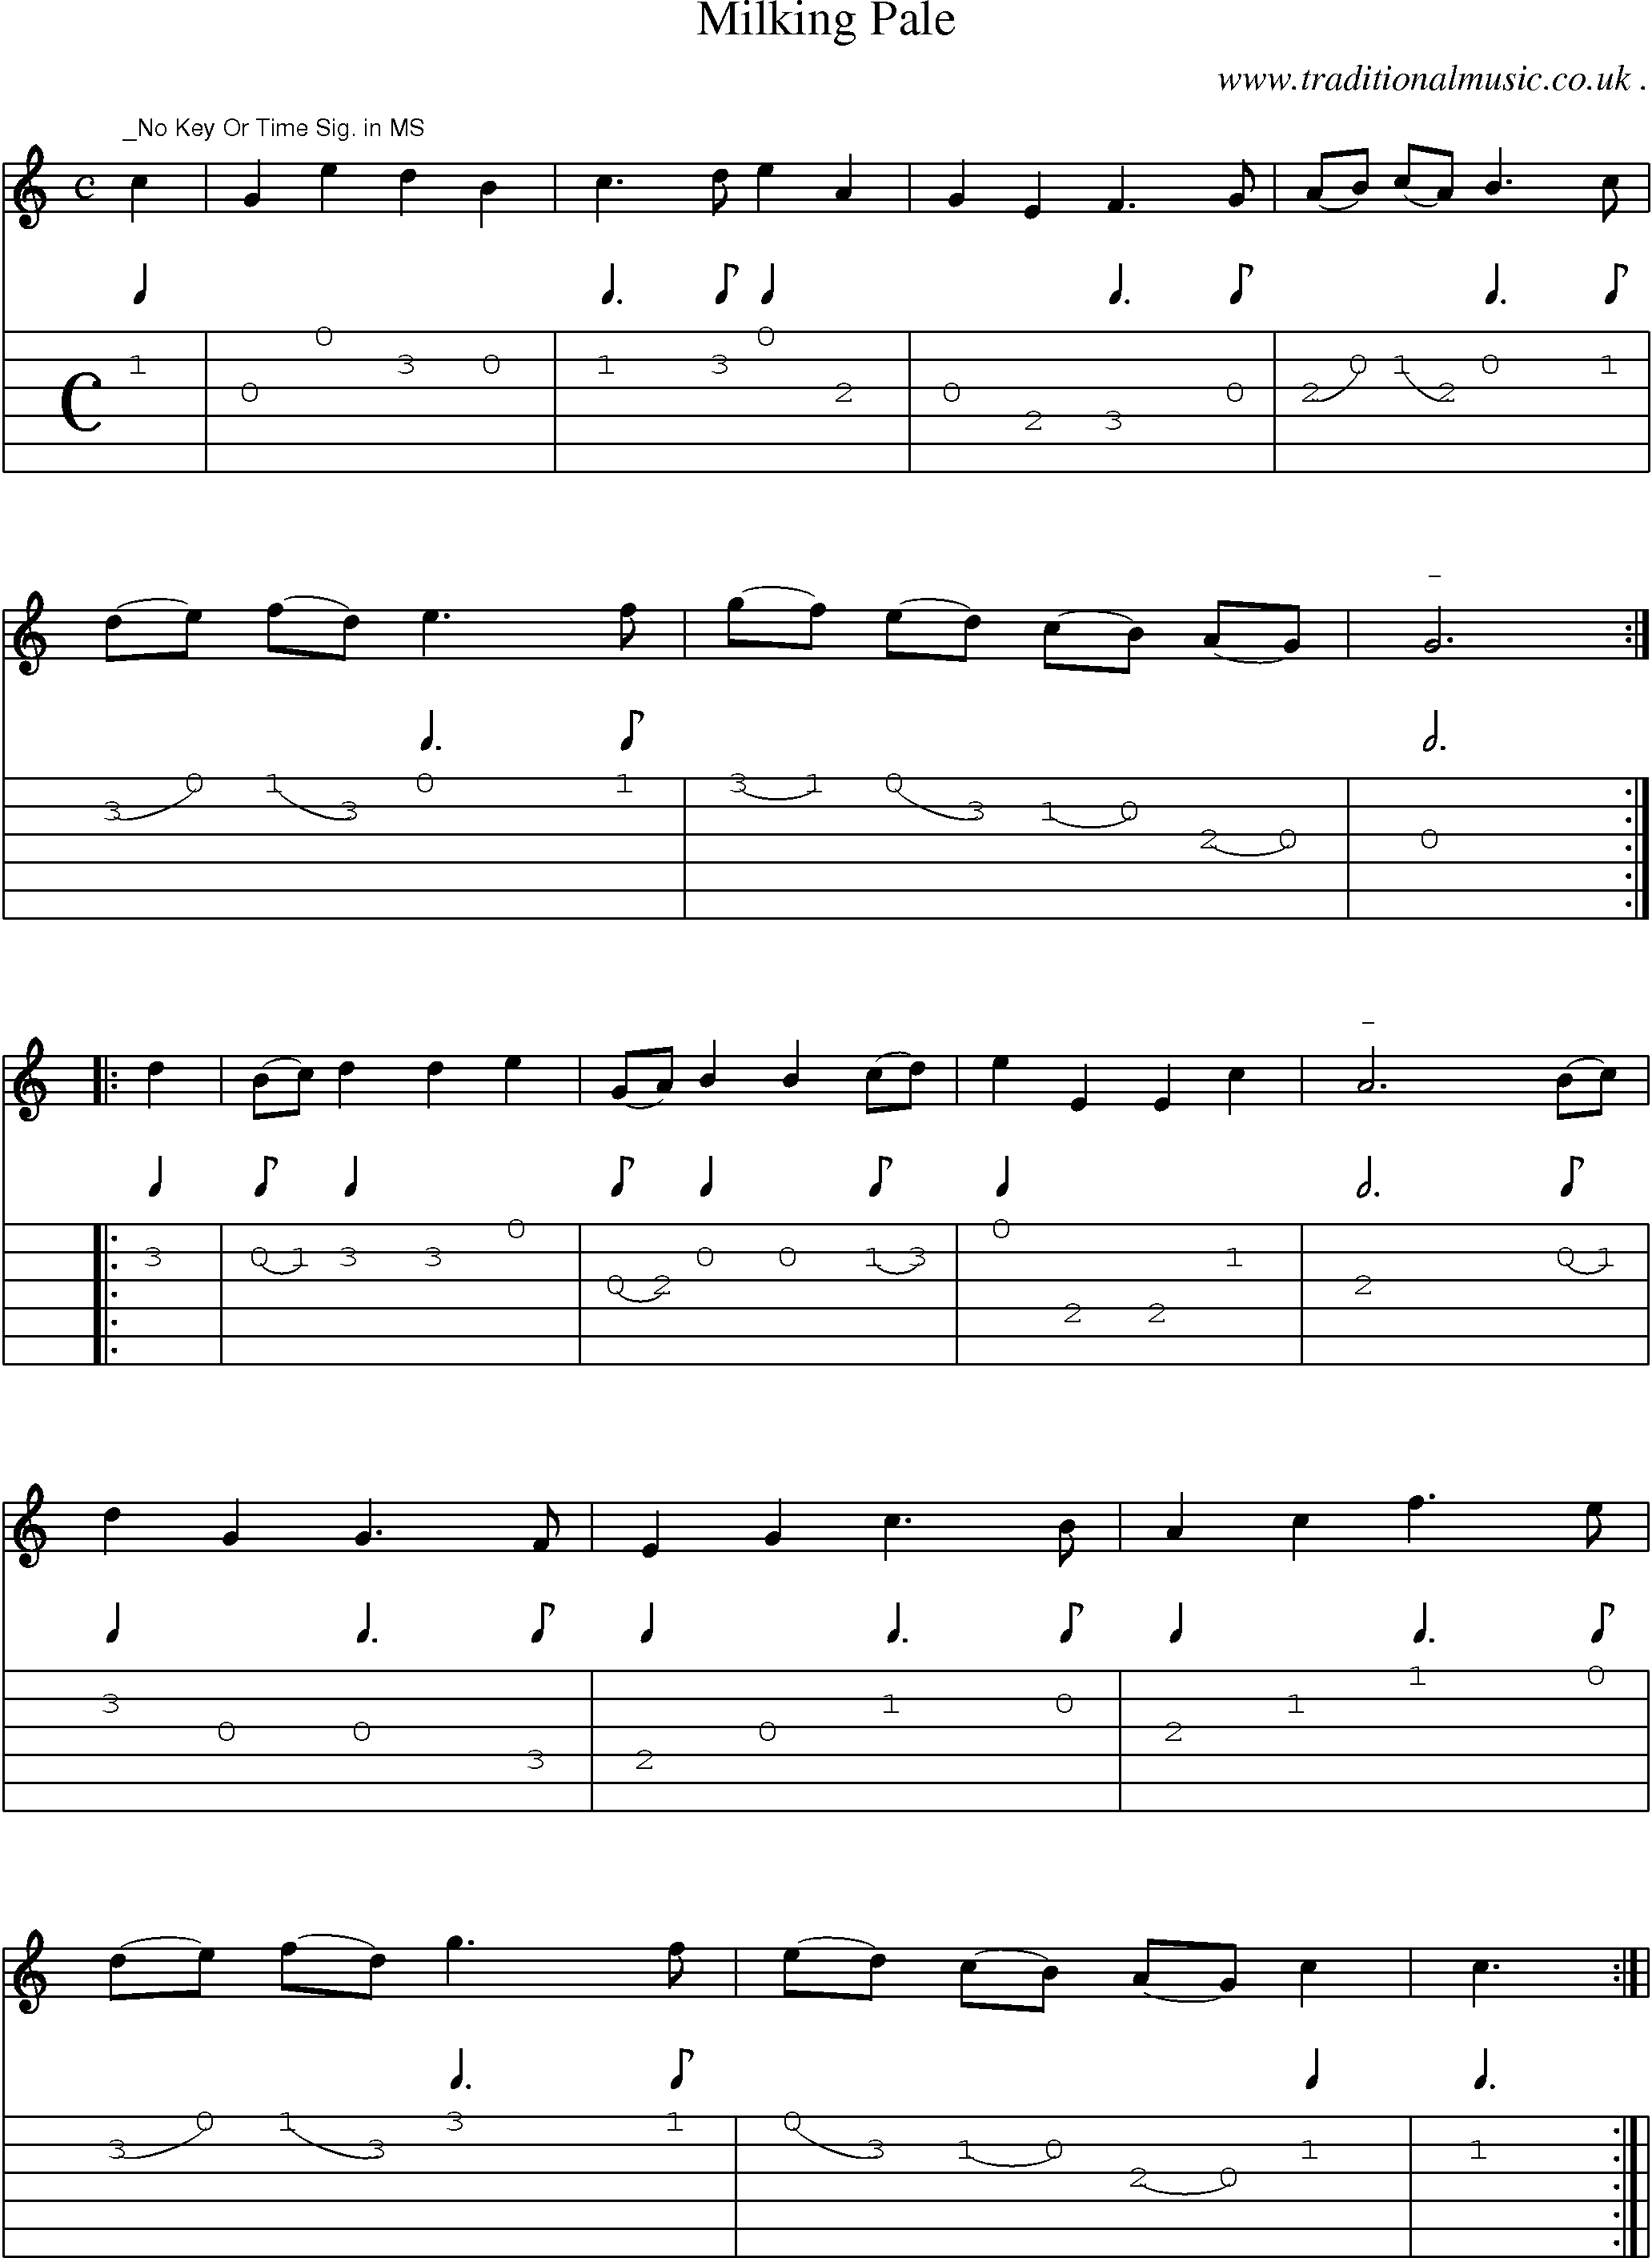 Sheet-Music and Guitar Tabs for Milking Pale